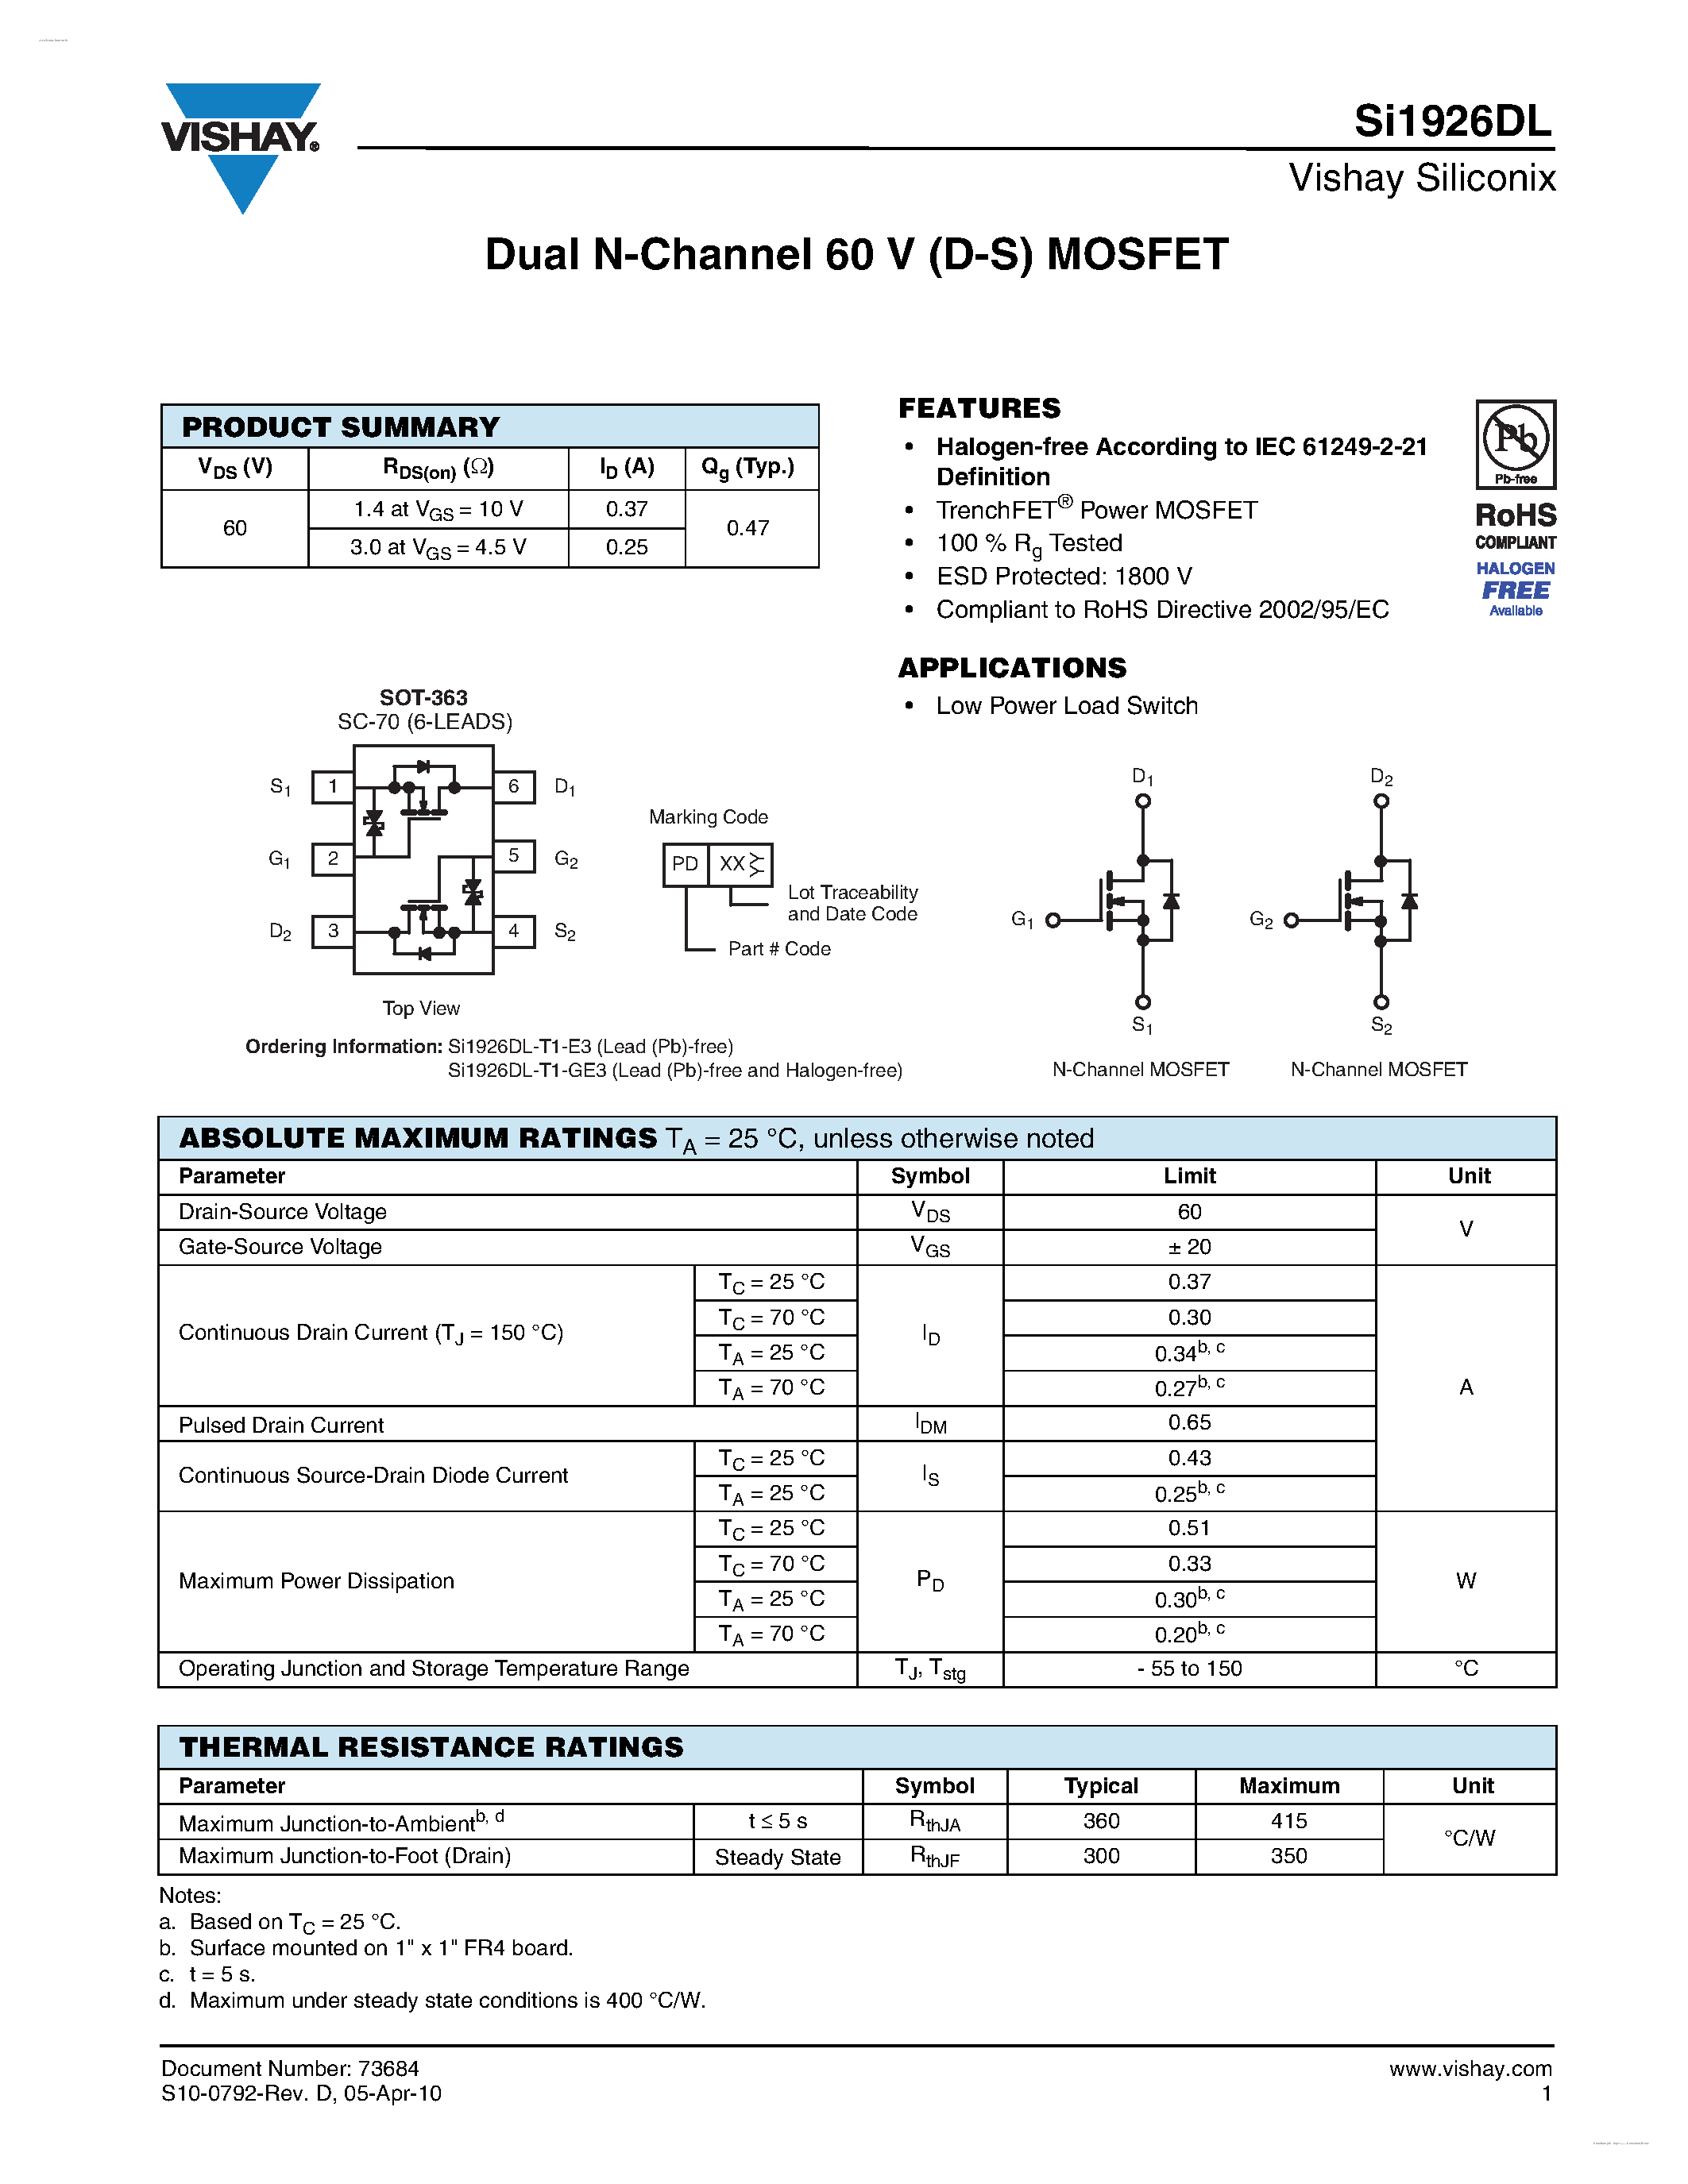 Datasheet SI1926DL - Dual N-Channel 60 V (D-S) MOSFET page 1